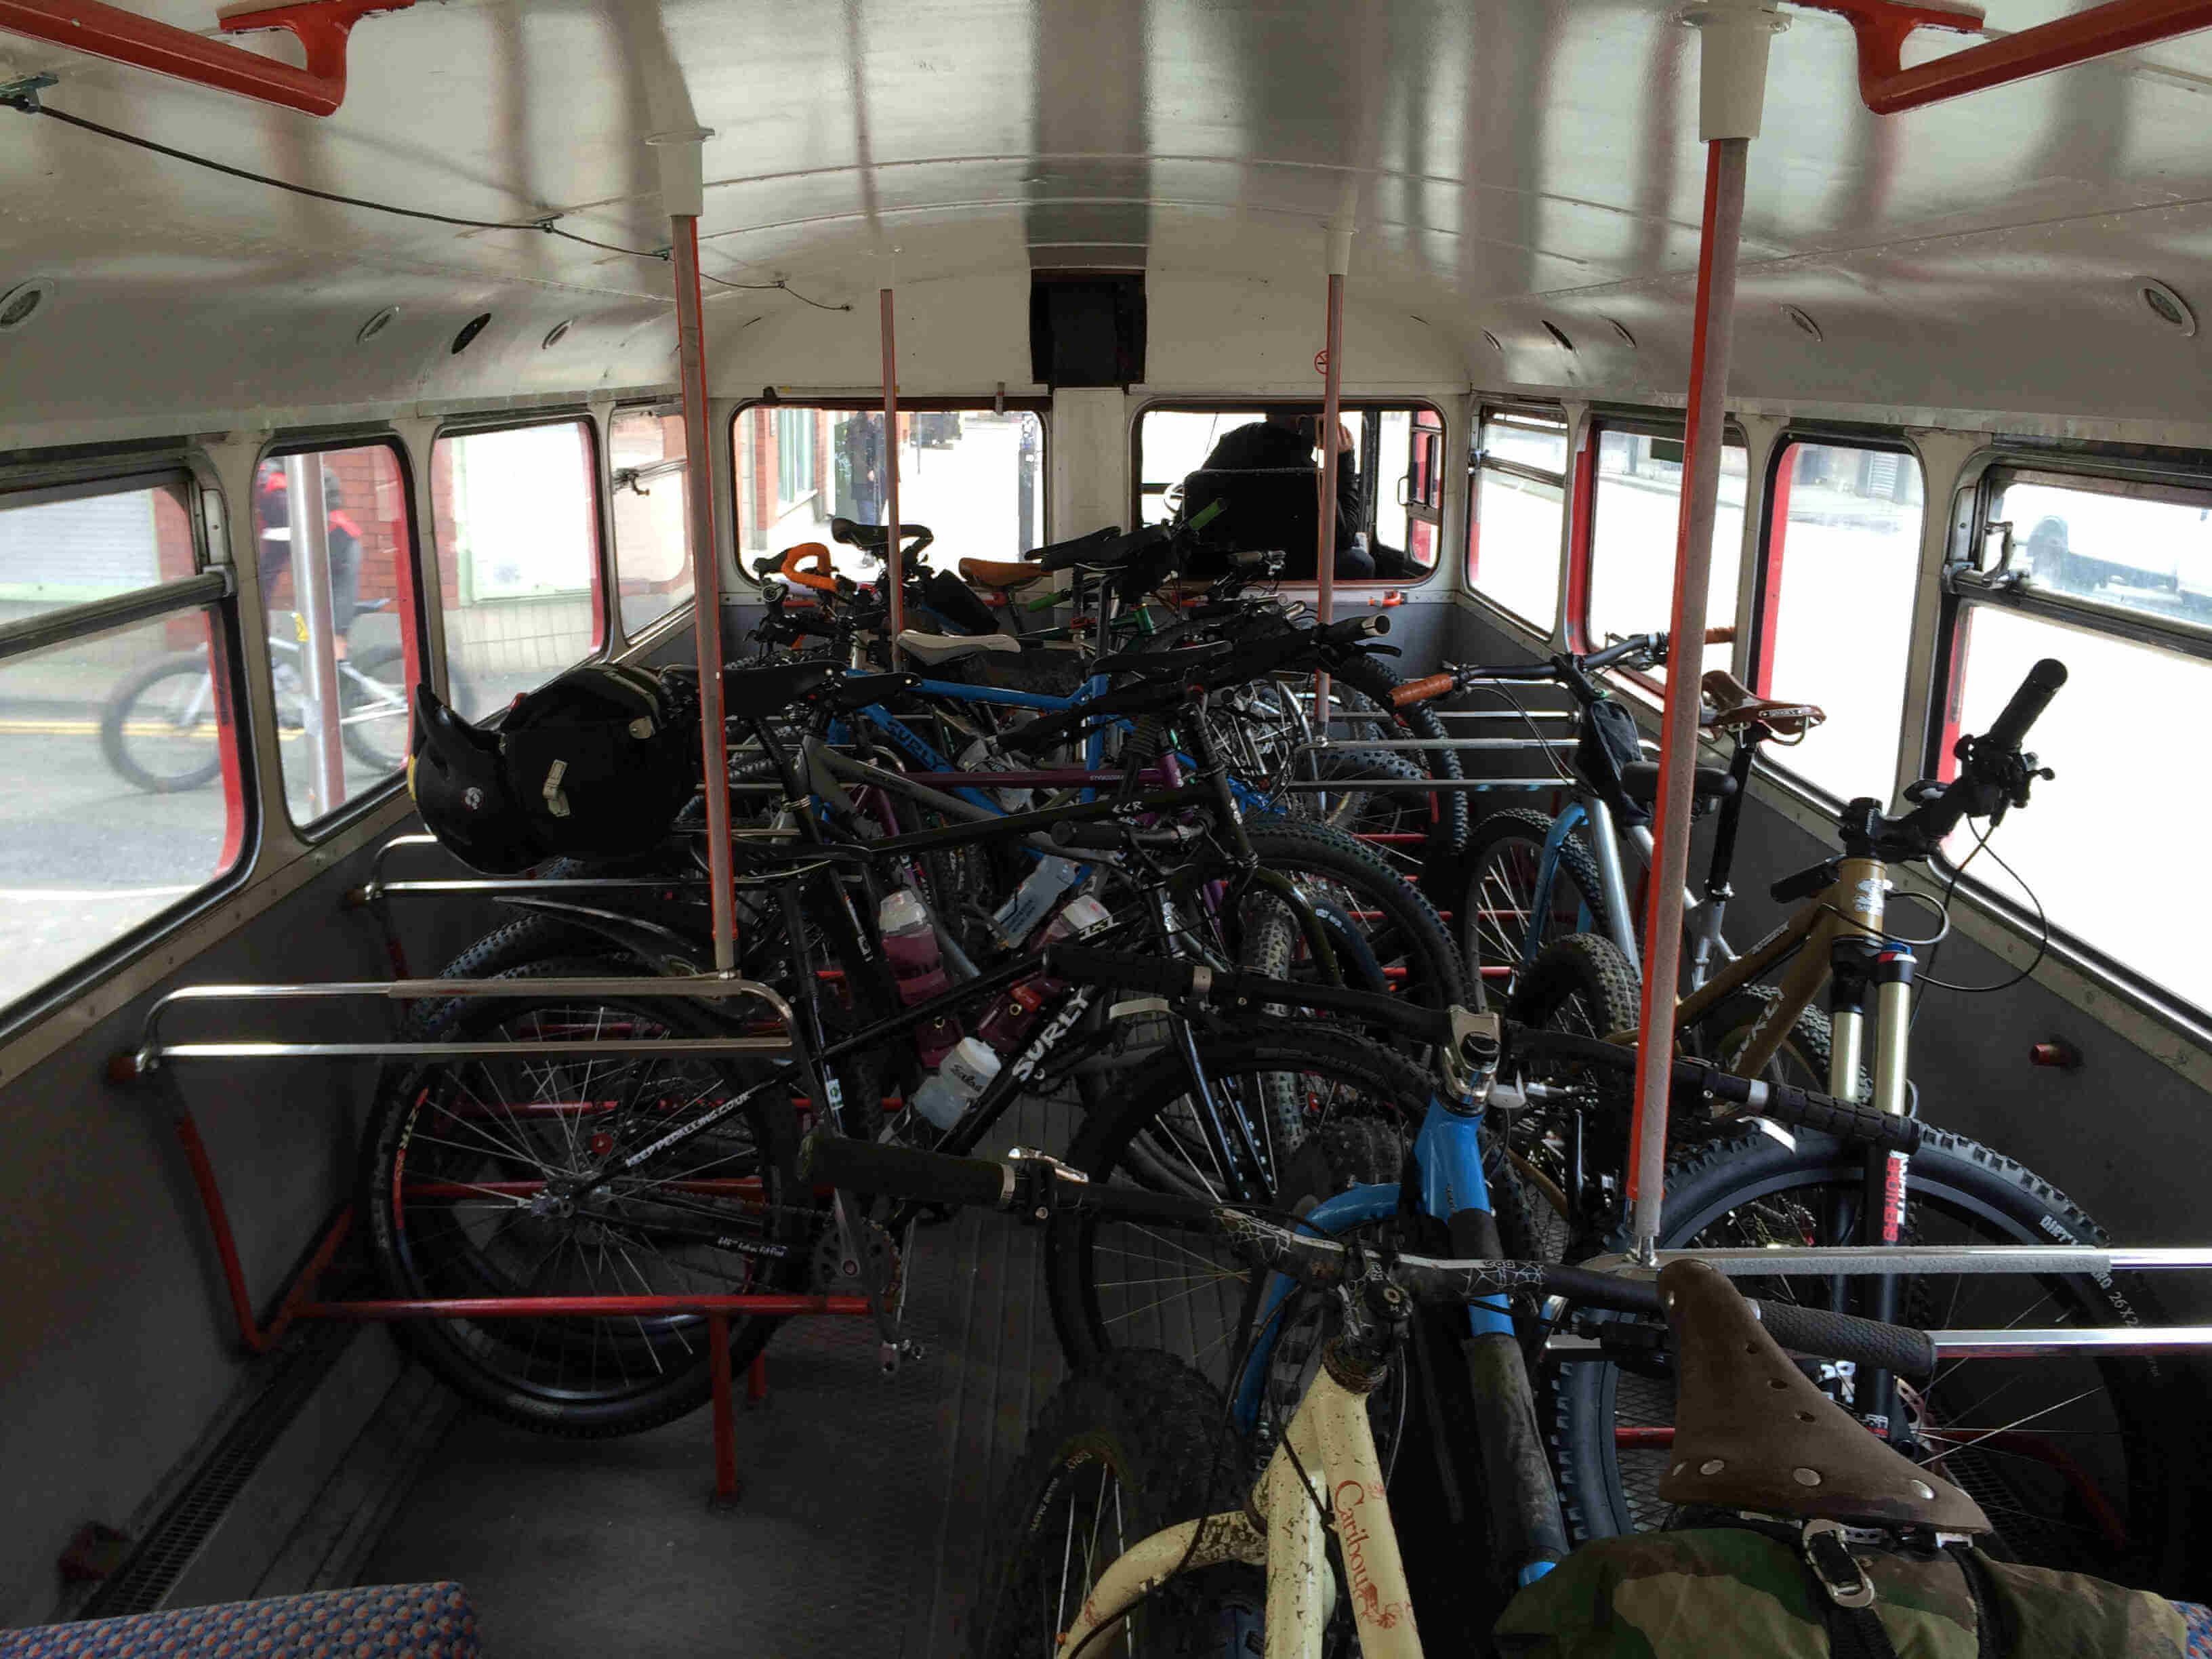 A view from the inside of a bus with Surly bikes parked sideways and leaning against each other